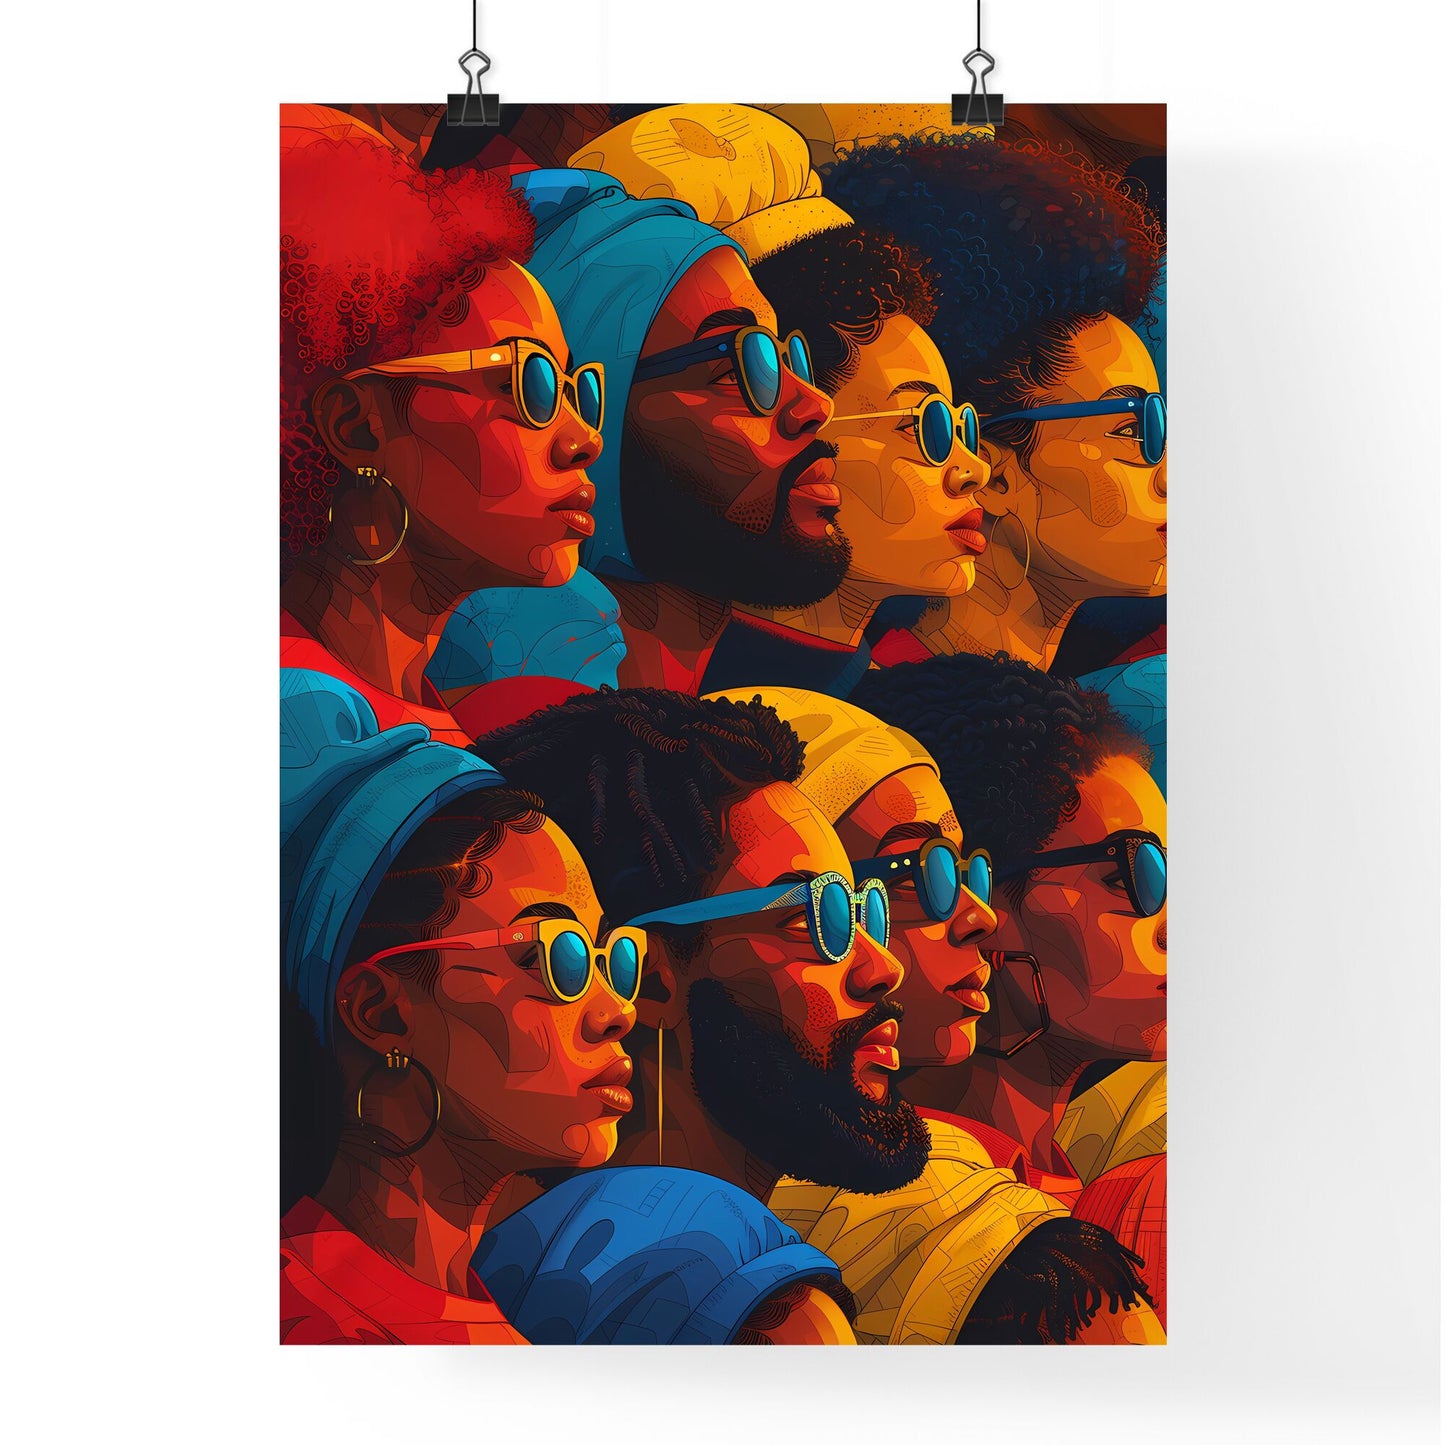 Modern art T-shirt design mockup with inclusivity theme featuring diverse characters in stylized painting style, available in five color options to match shirt hues Default Title